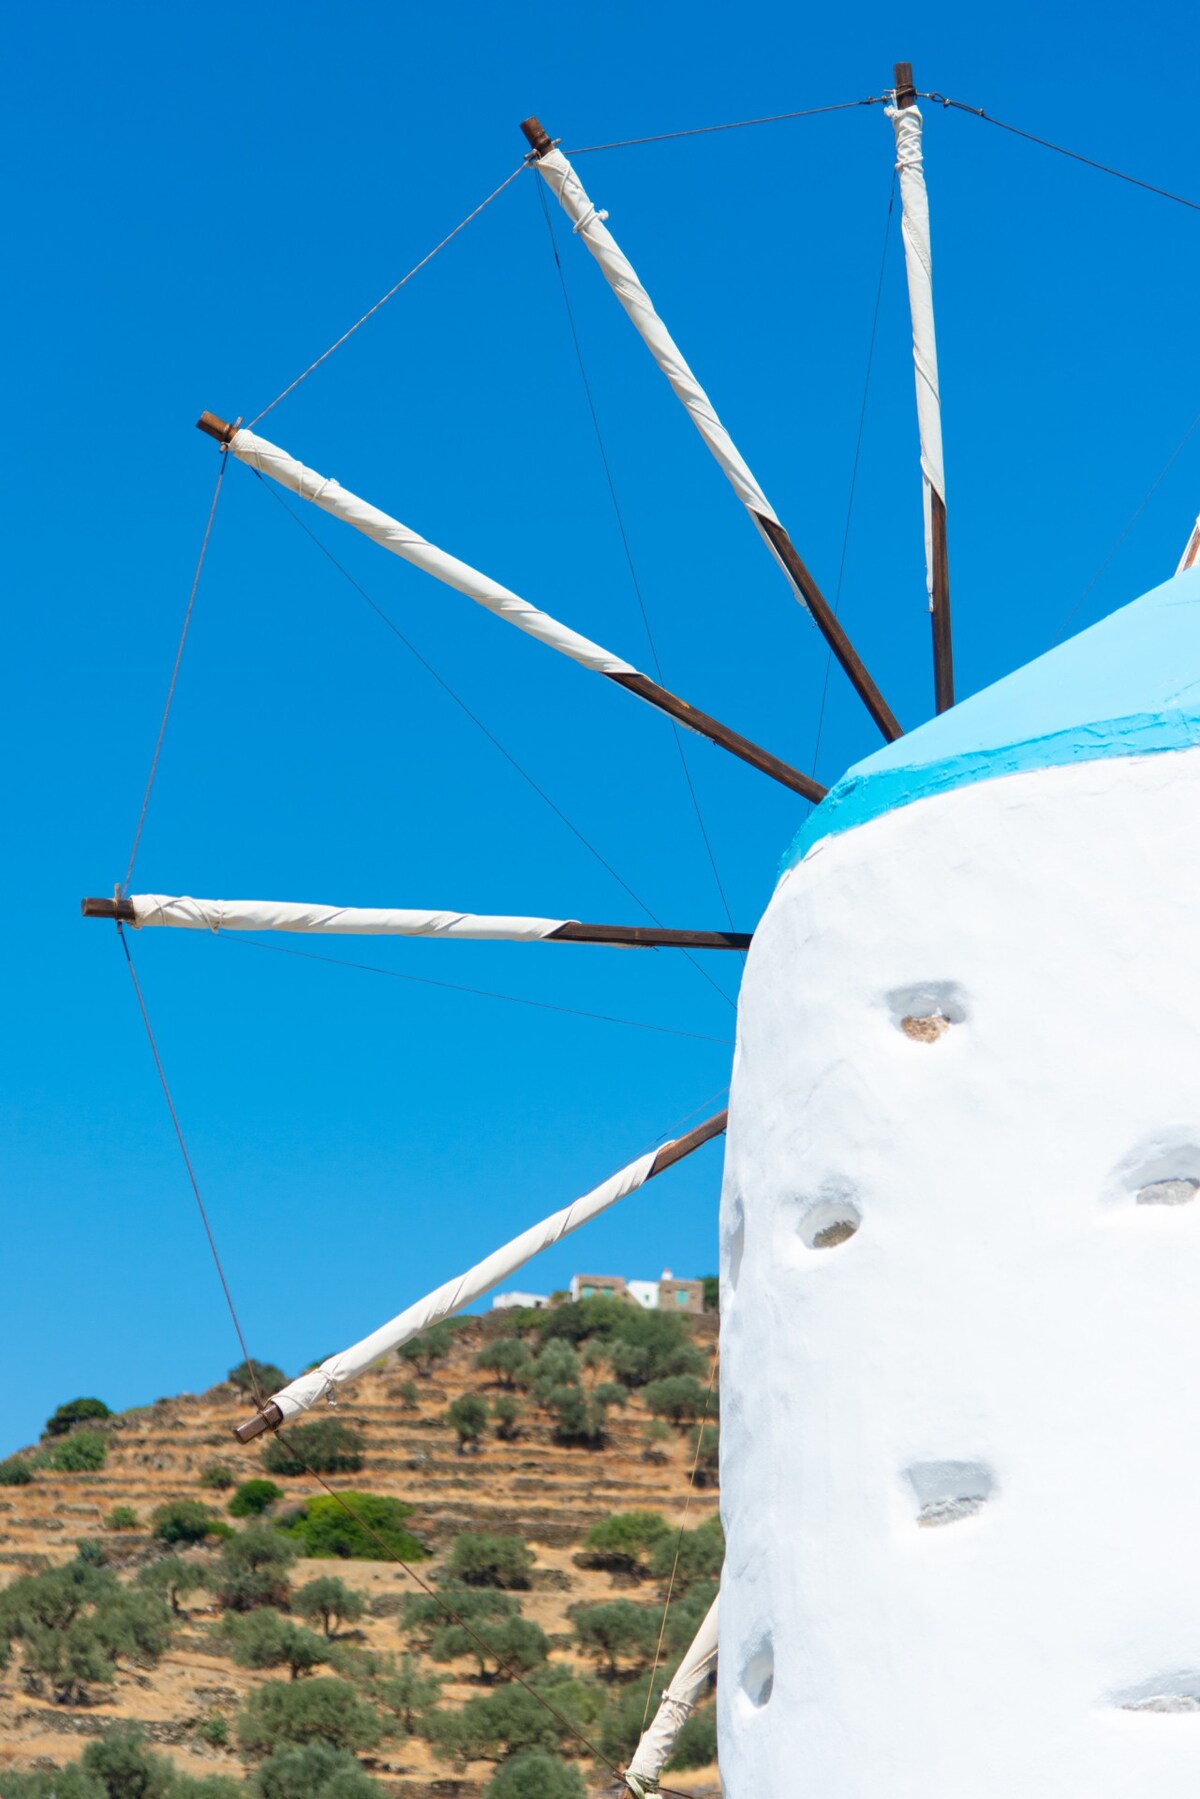 Art house Sifnos "By the Windmill"